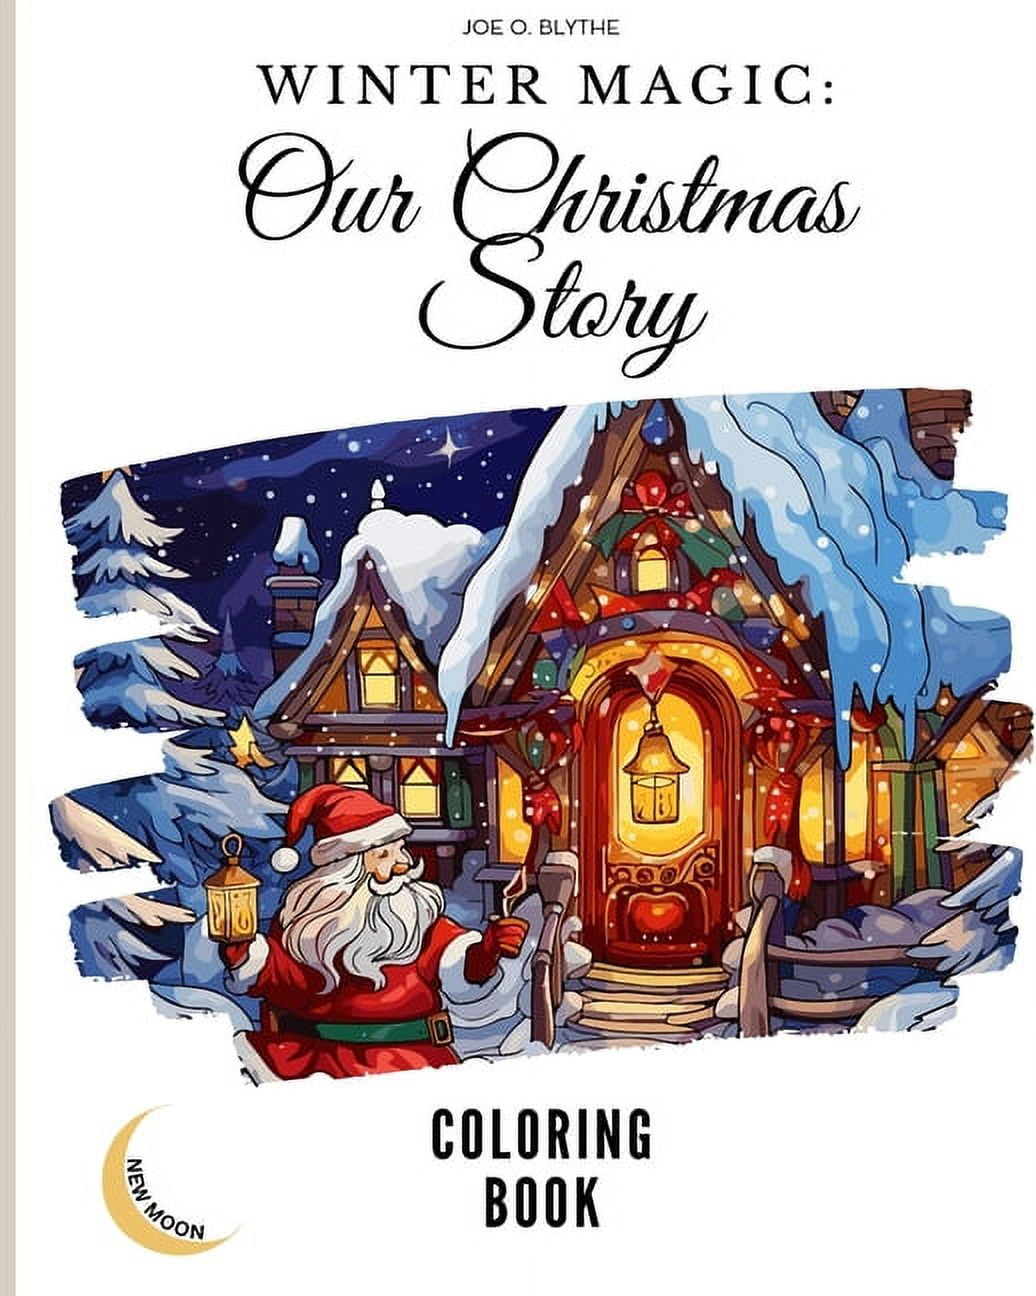 Our Christmas Story